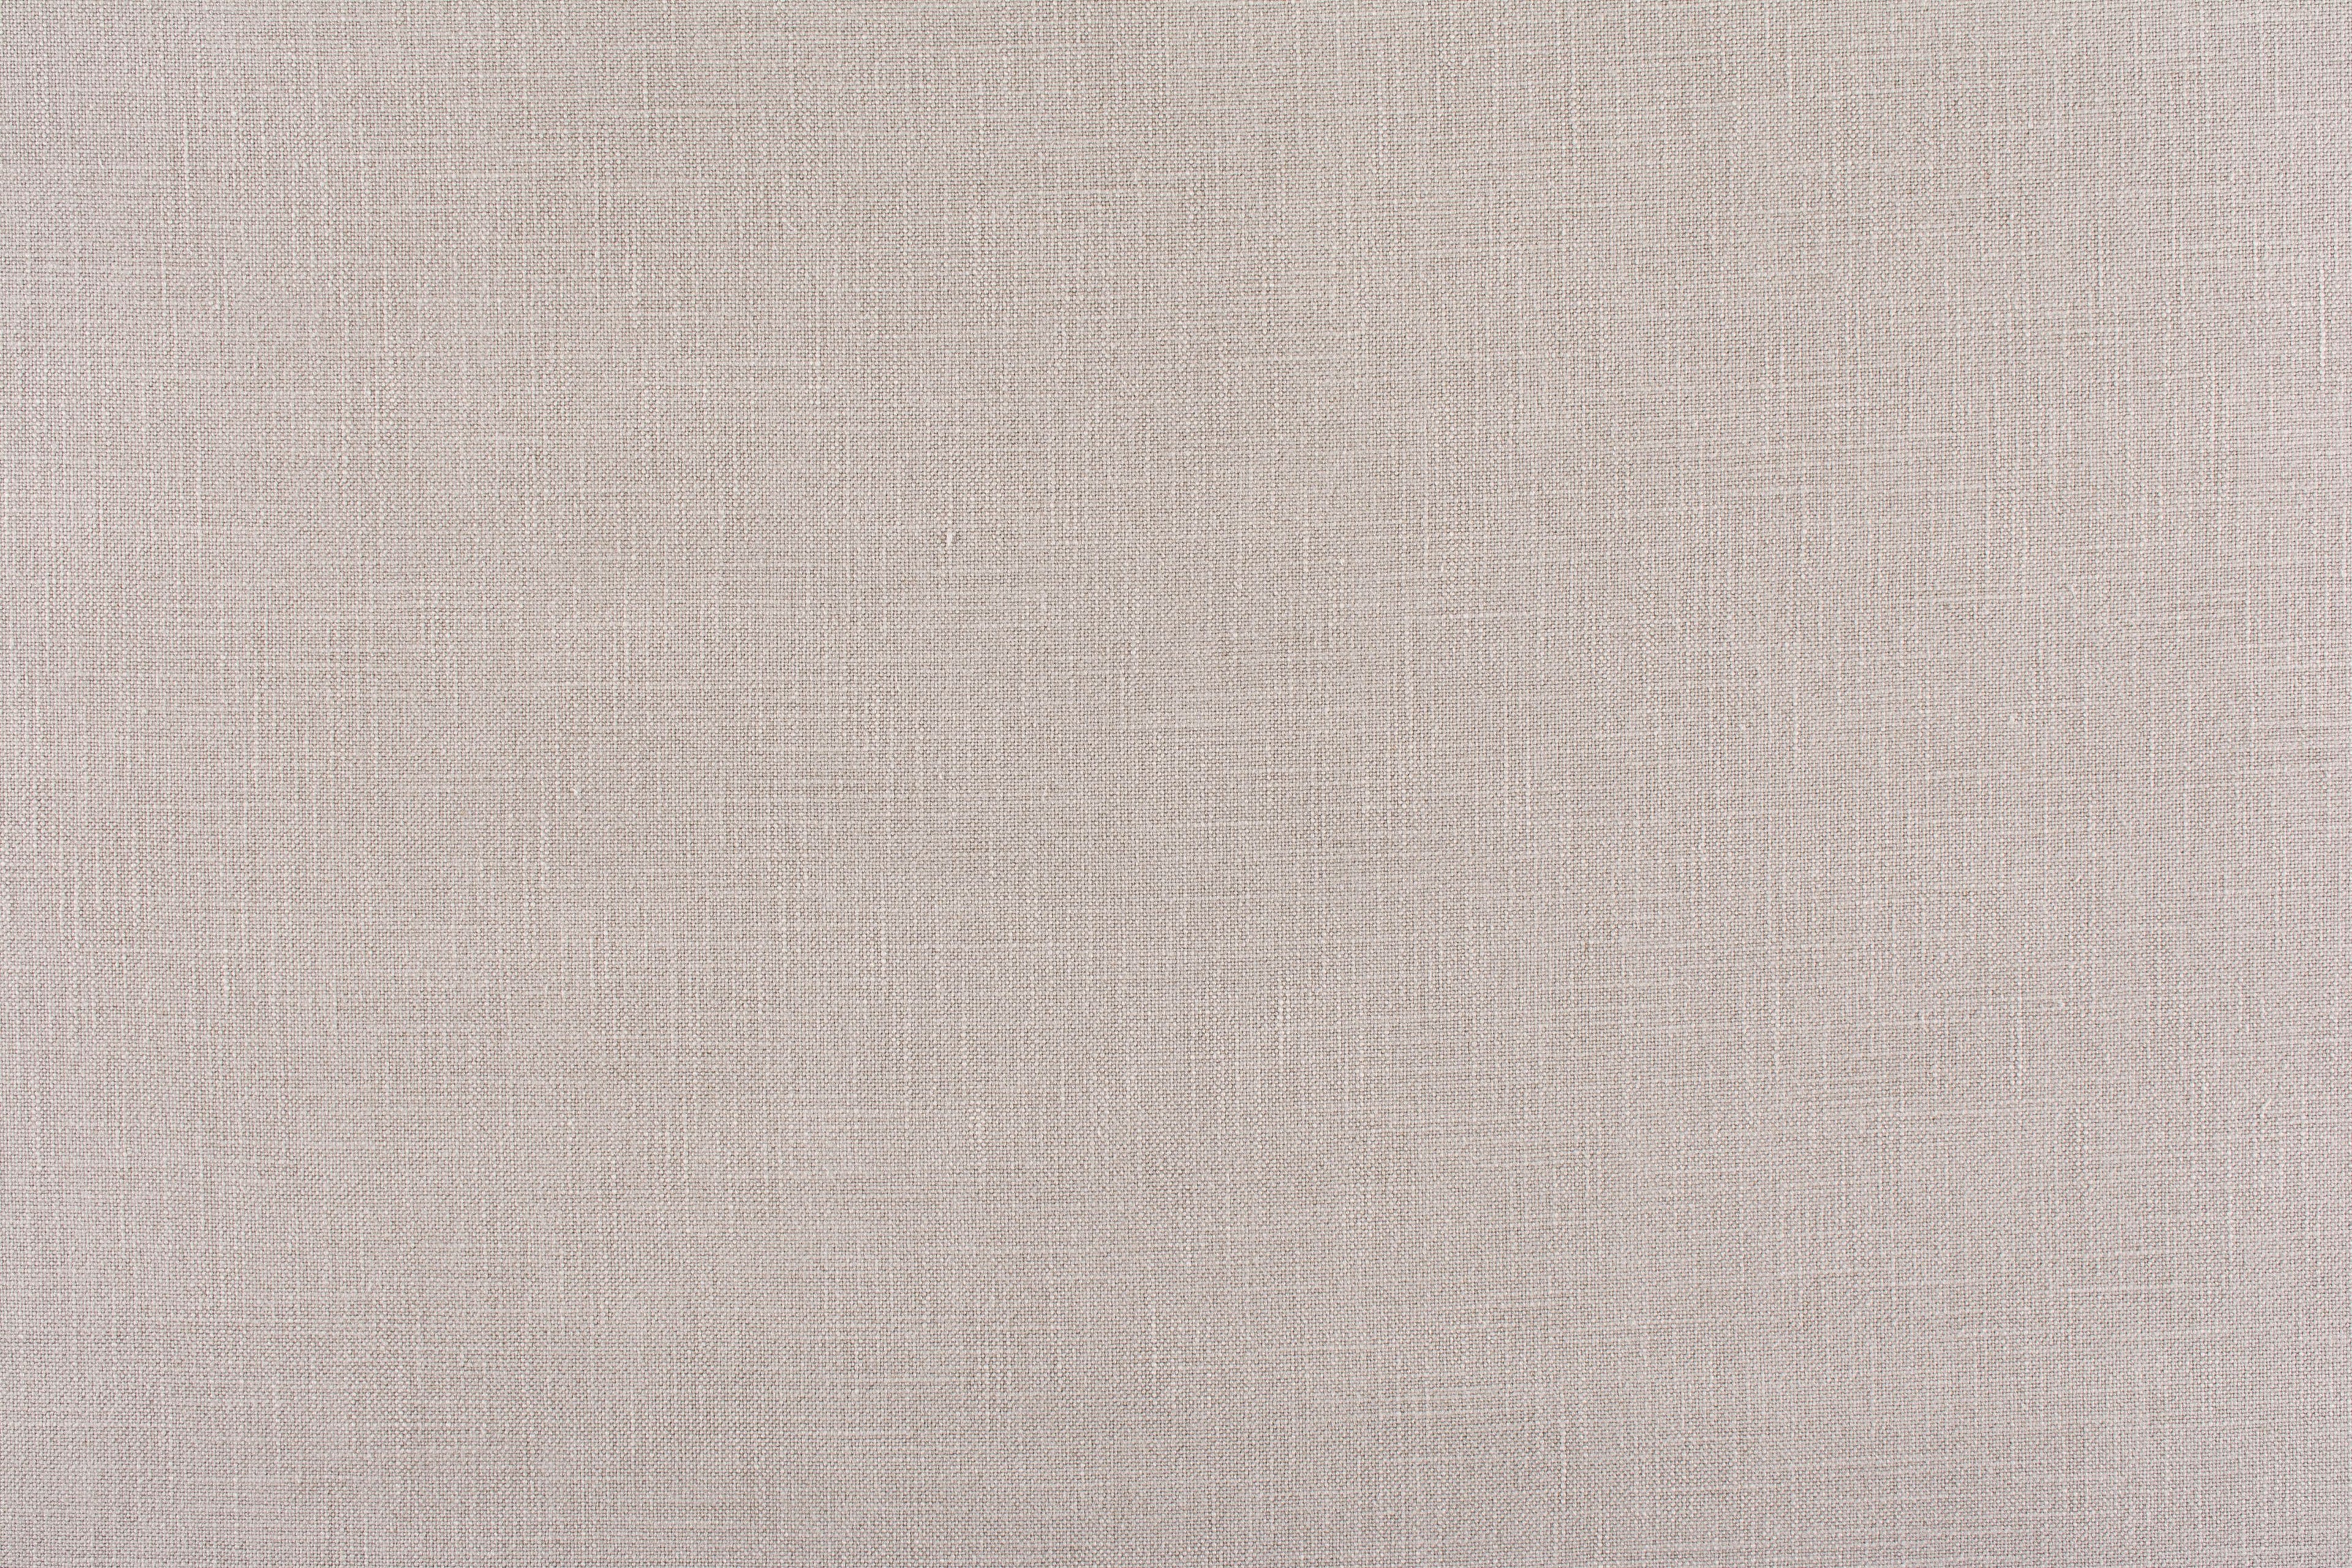 Stonewash fabric in nickel color - pattern number H8 0005406T - by Scalamandre in the Old World Weavers collection